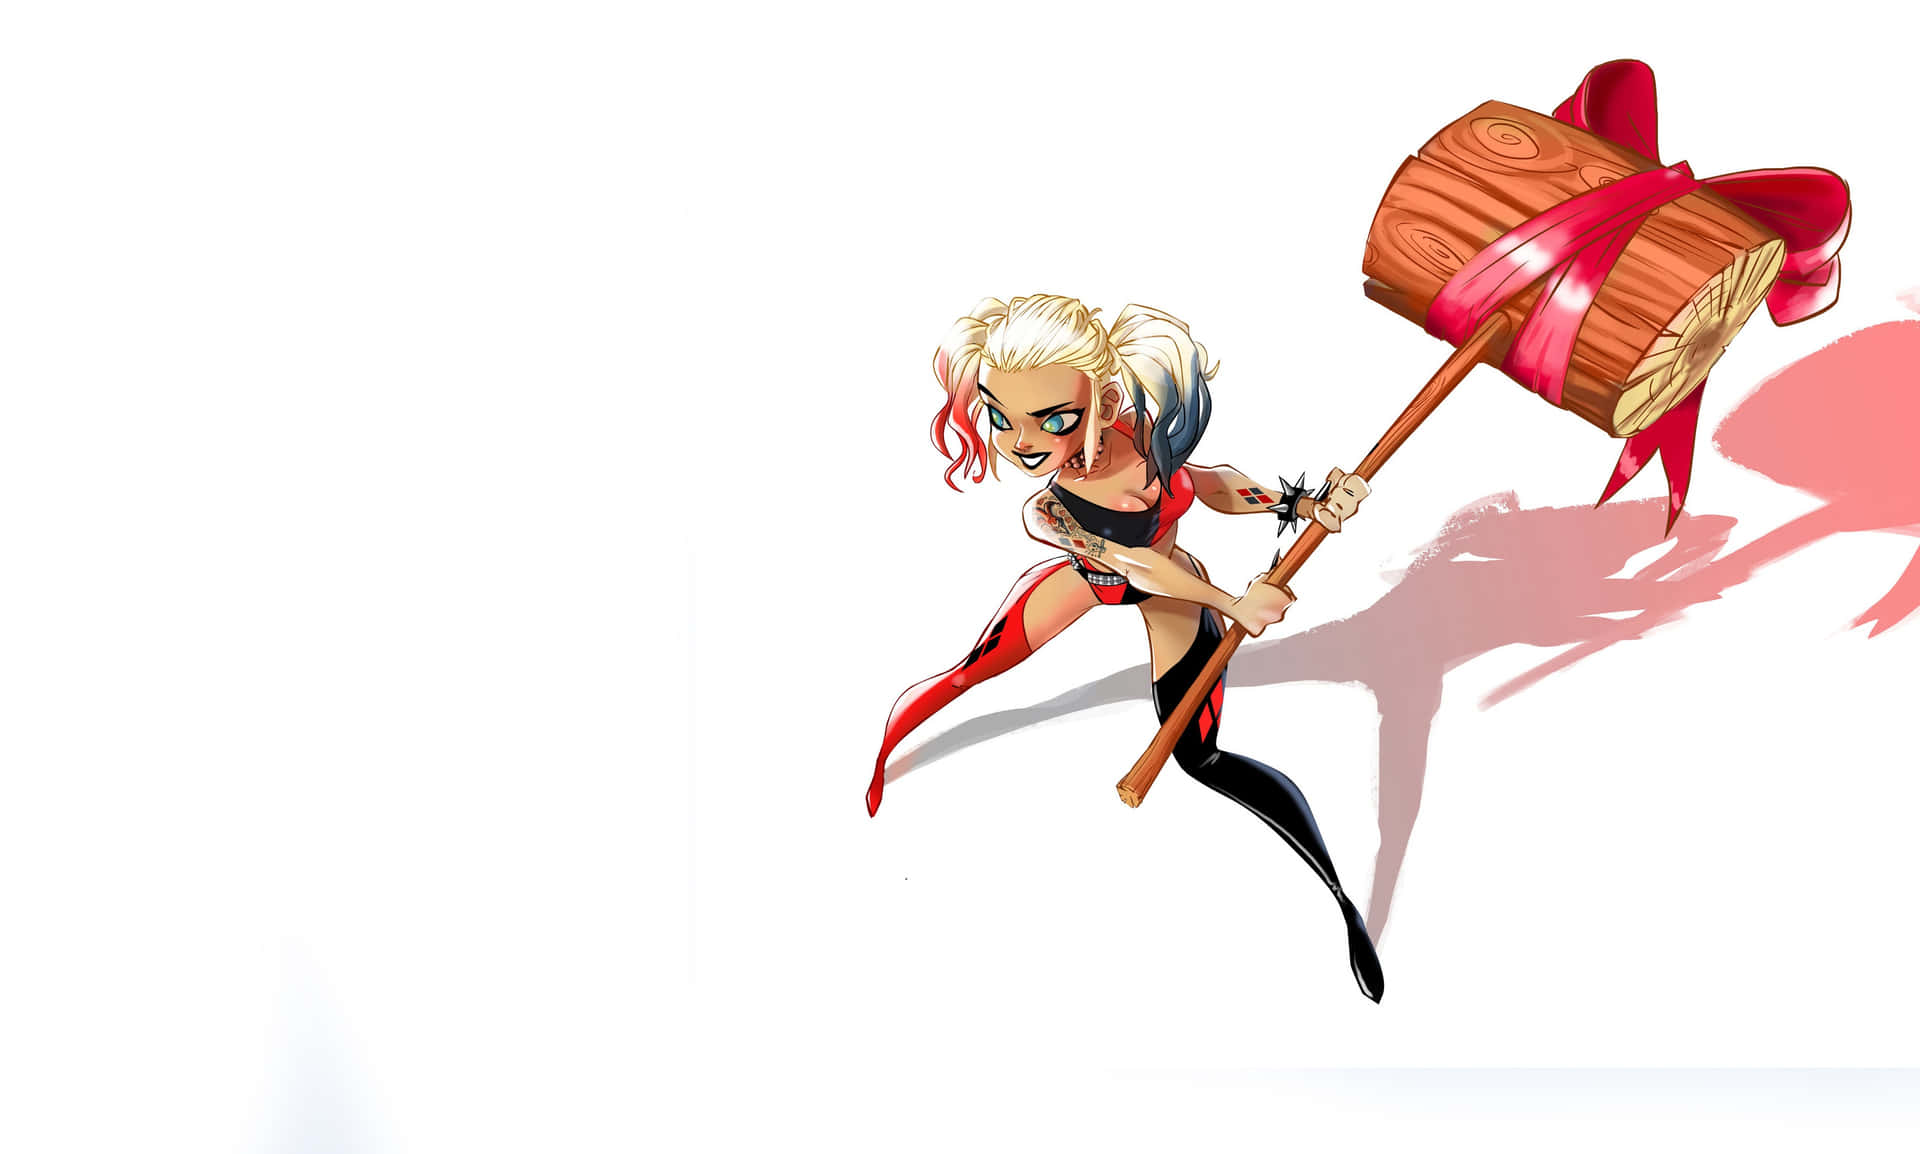 Harley Quinn wielding her iconic hammer in a dynamic action pose. Wallpaper